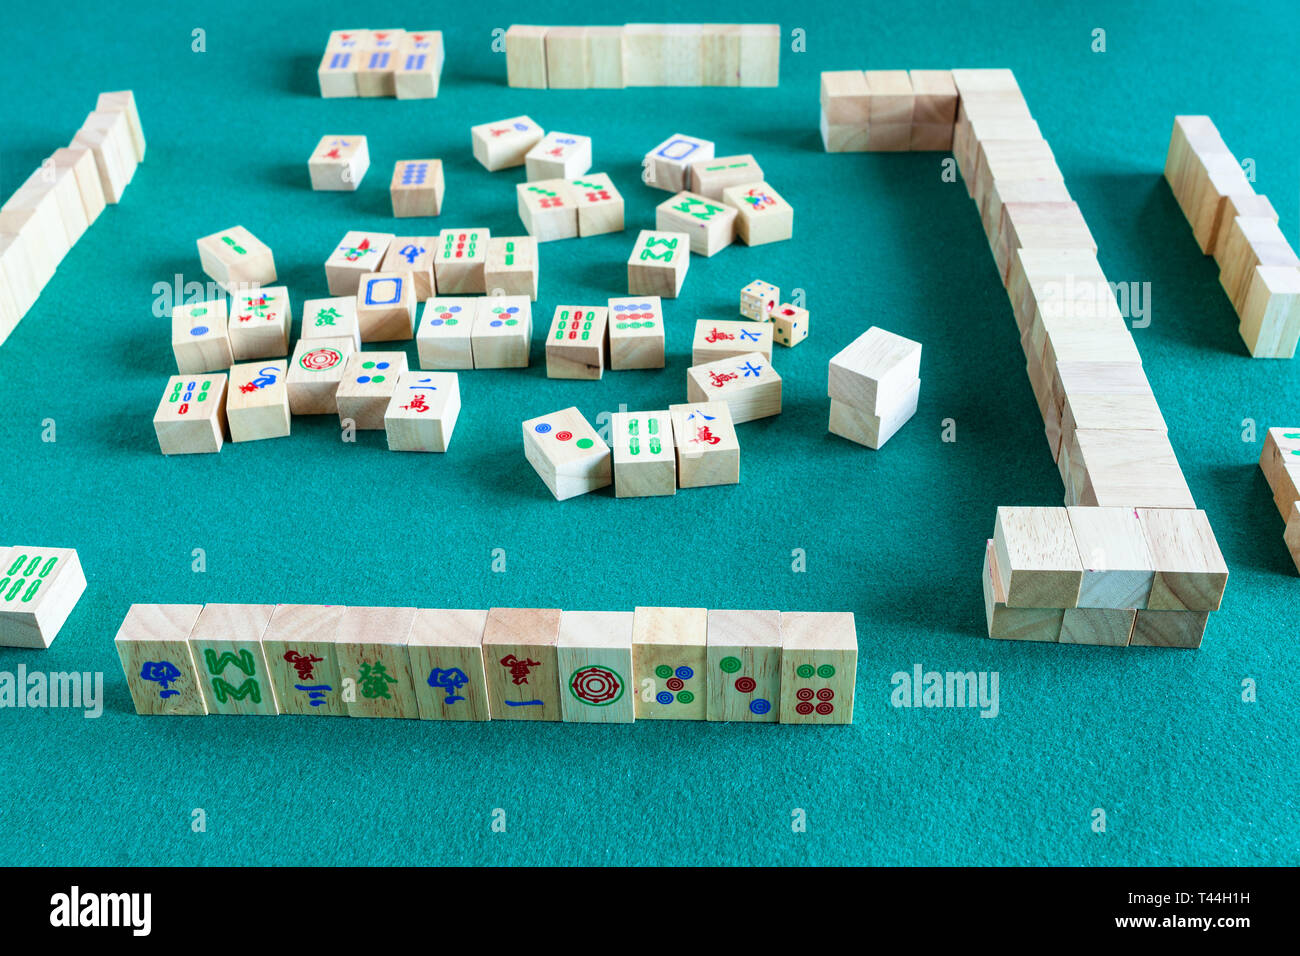 playing in mahjong game, tile-based chinese strategy board game on green baize table Stock Photo